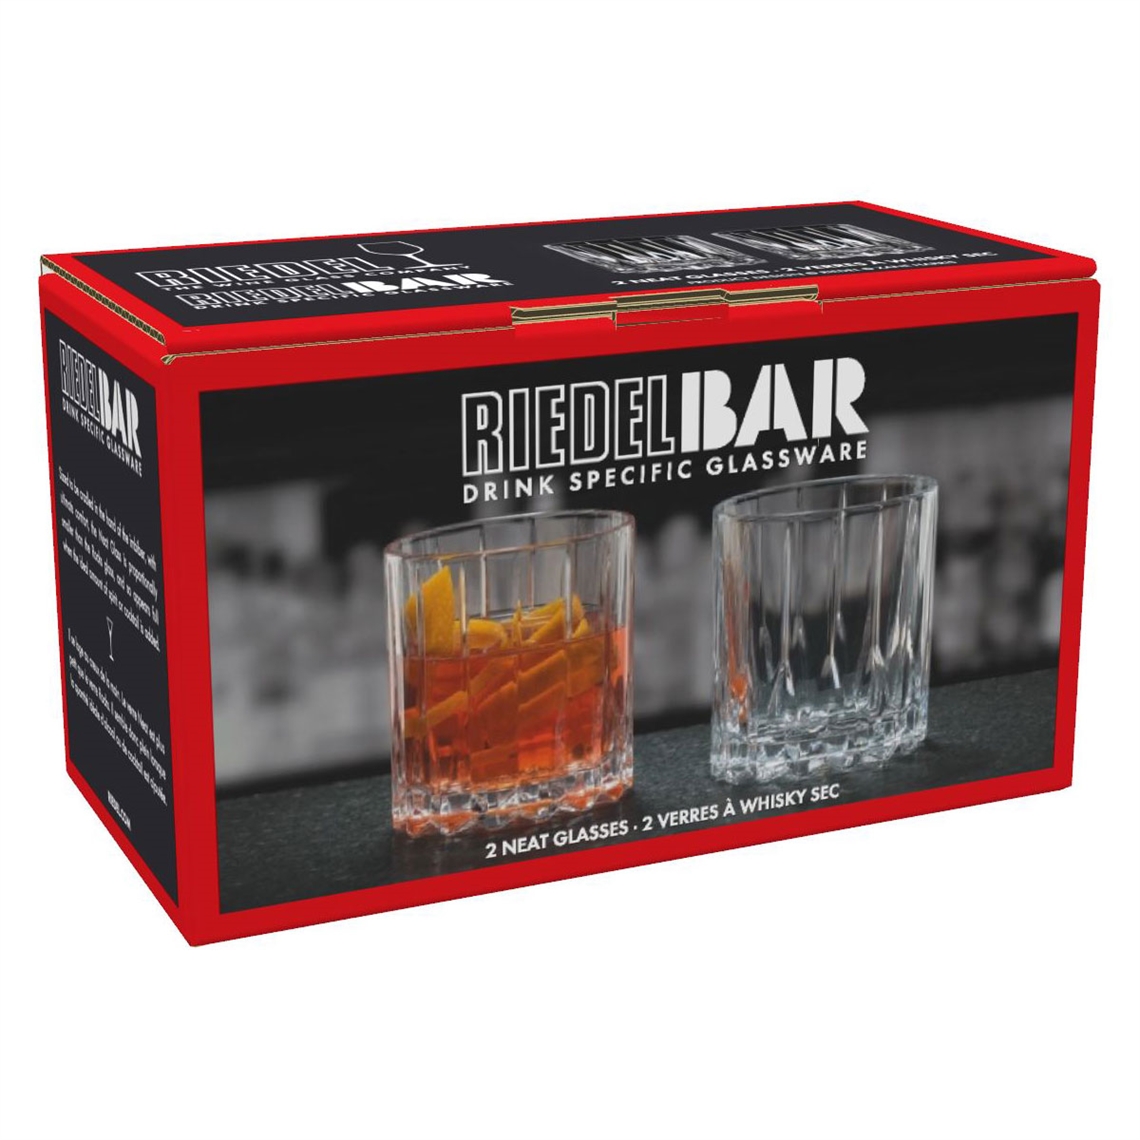 Riedel Bar Drink Specific Neat Tumbler - Set of 2 - 6417/01